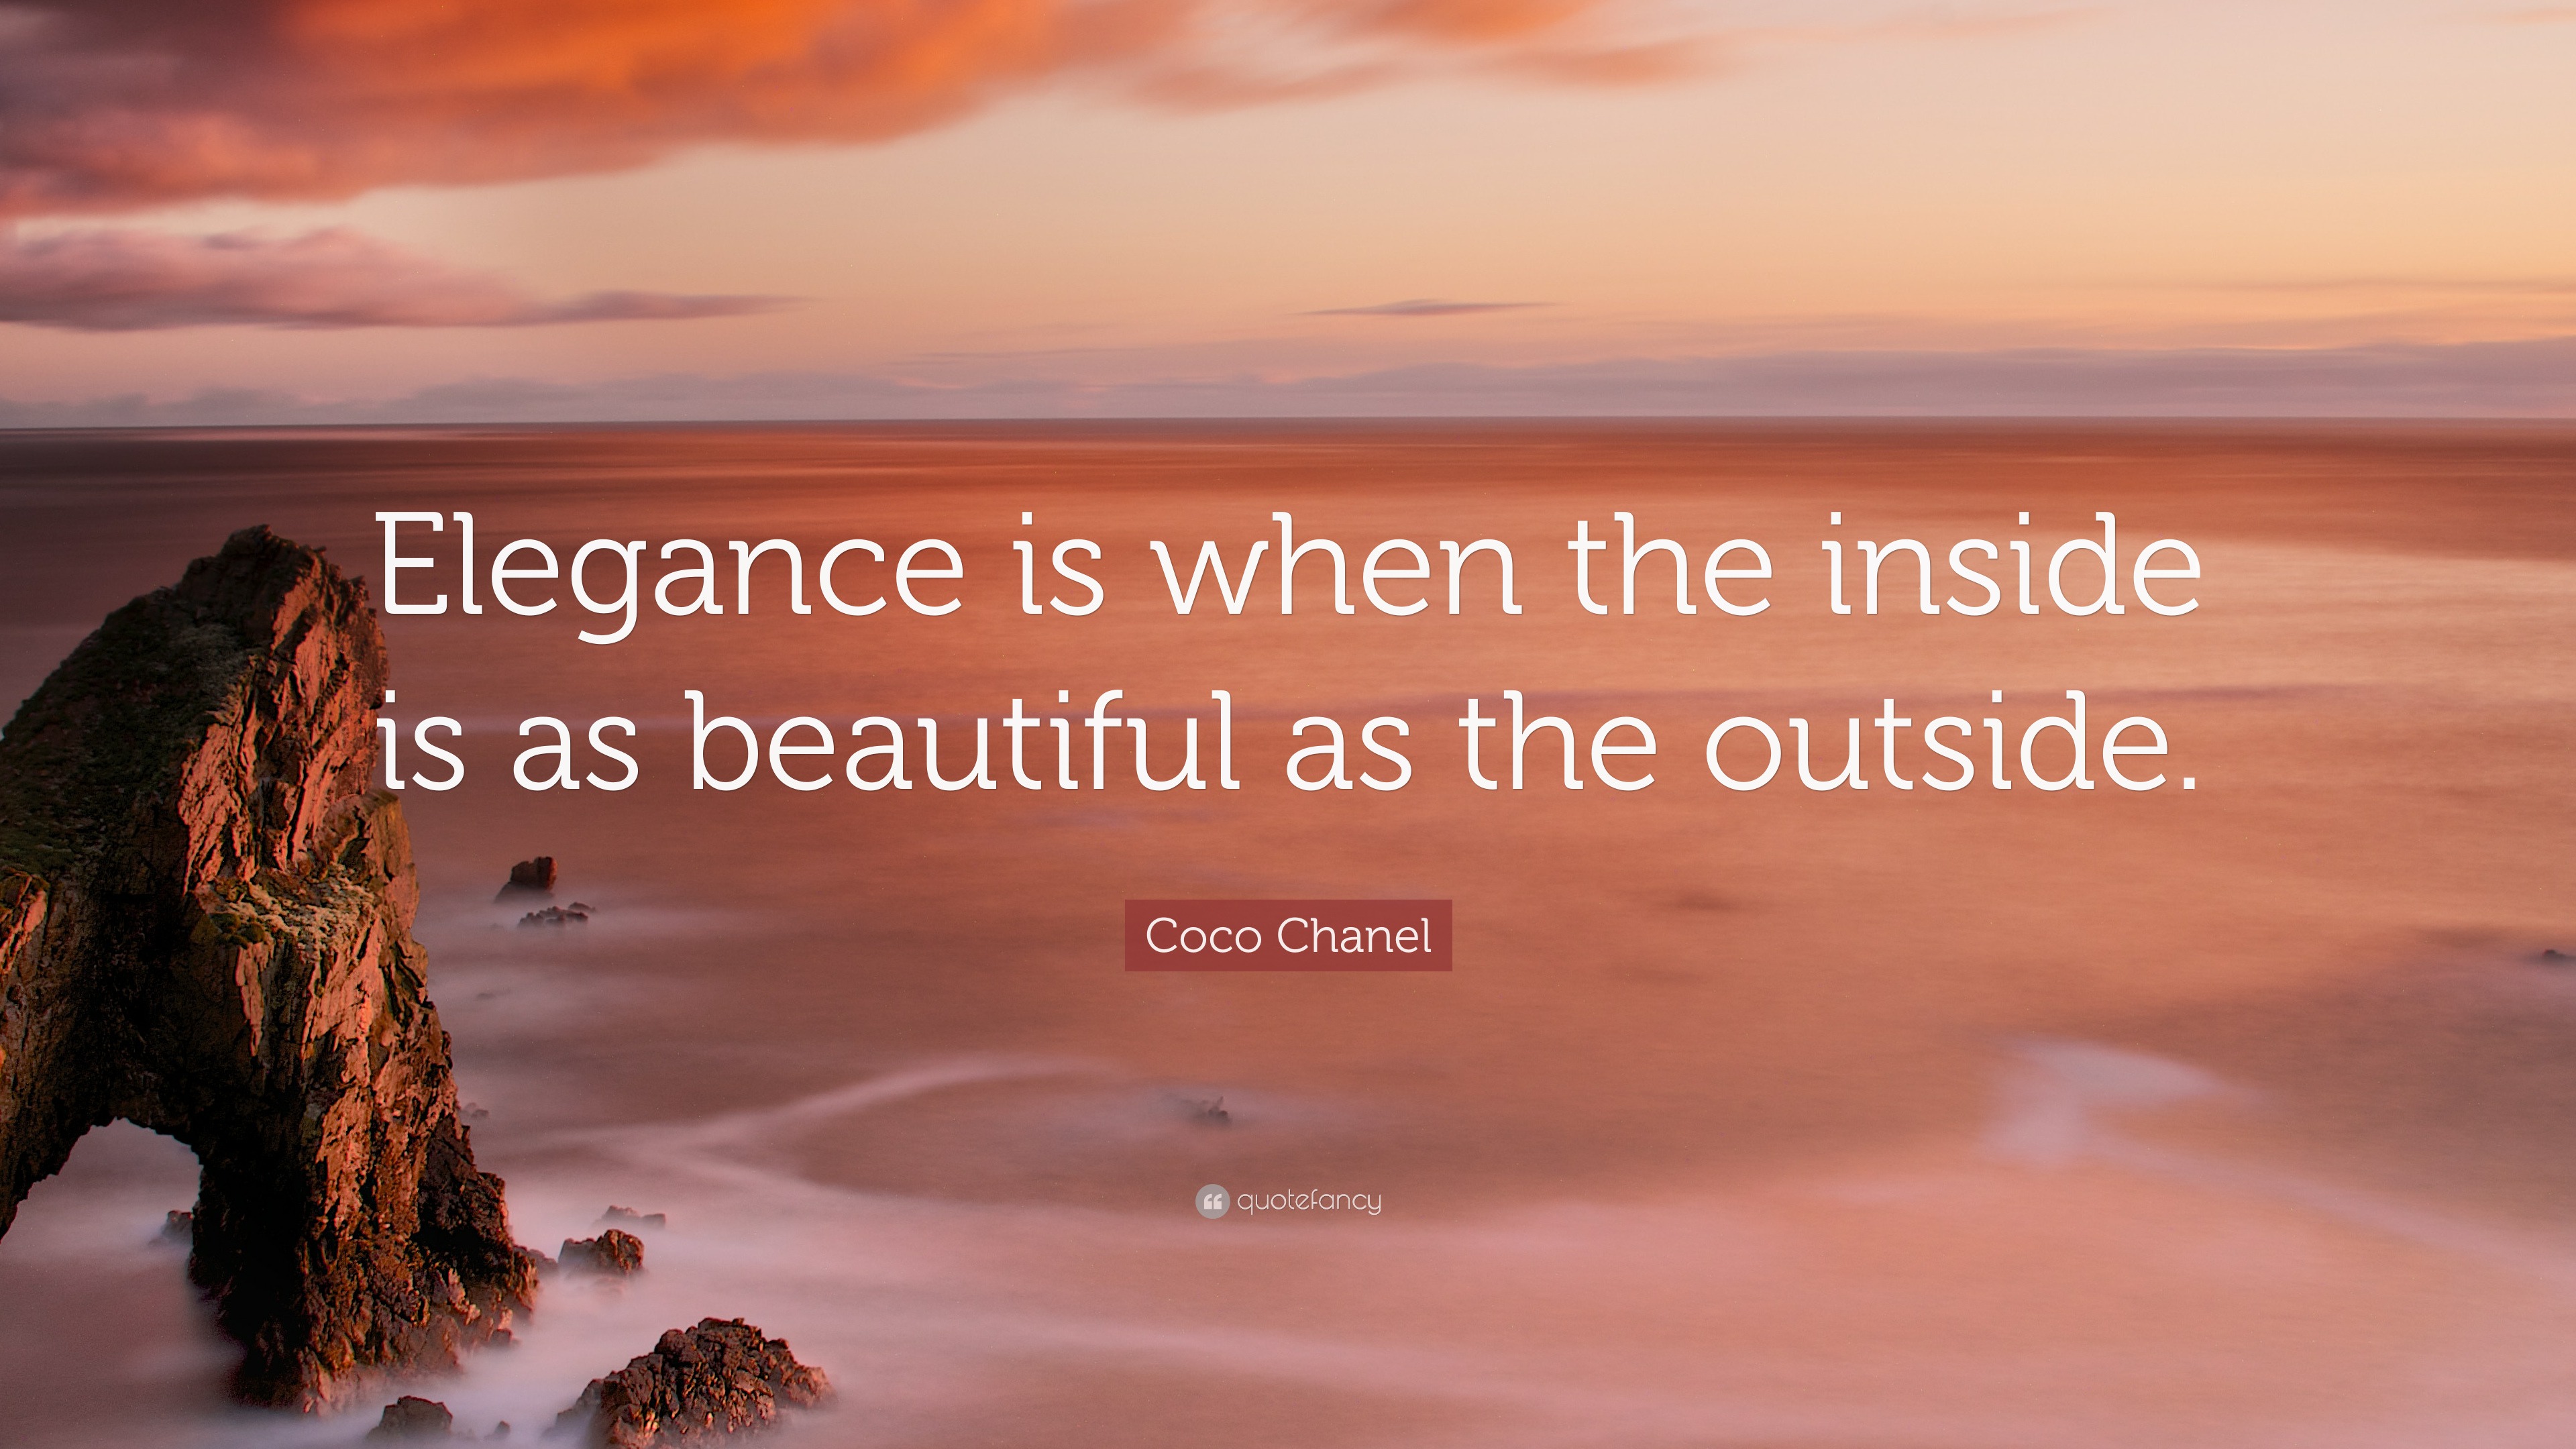 Coco Chanel Quote: “Elegance is when the inside is as beautiful as